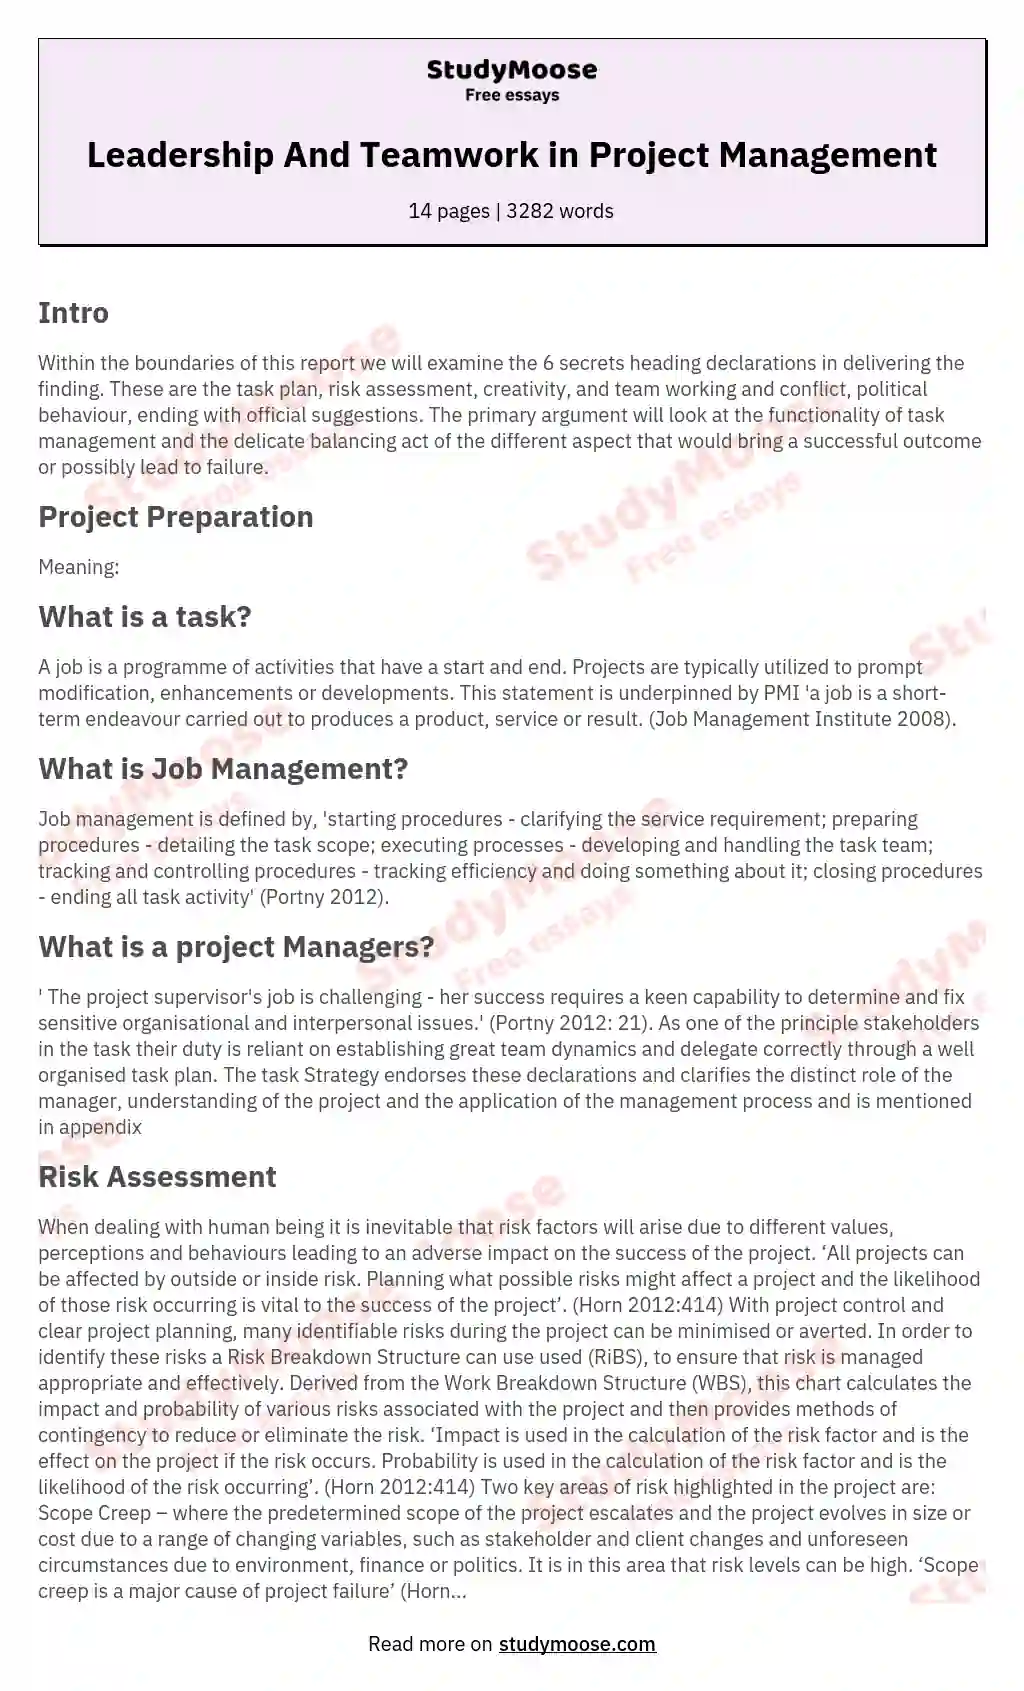 Leadership And Teamwork in  Project Management essay